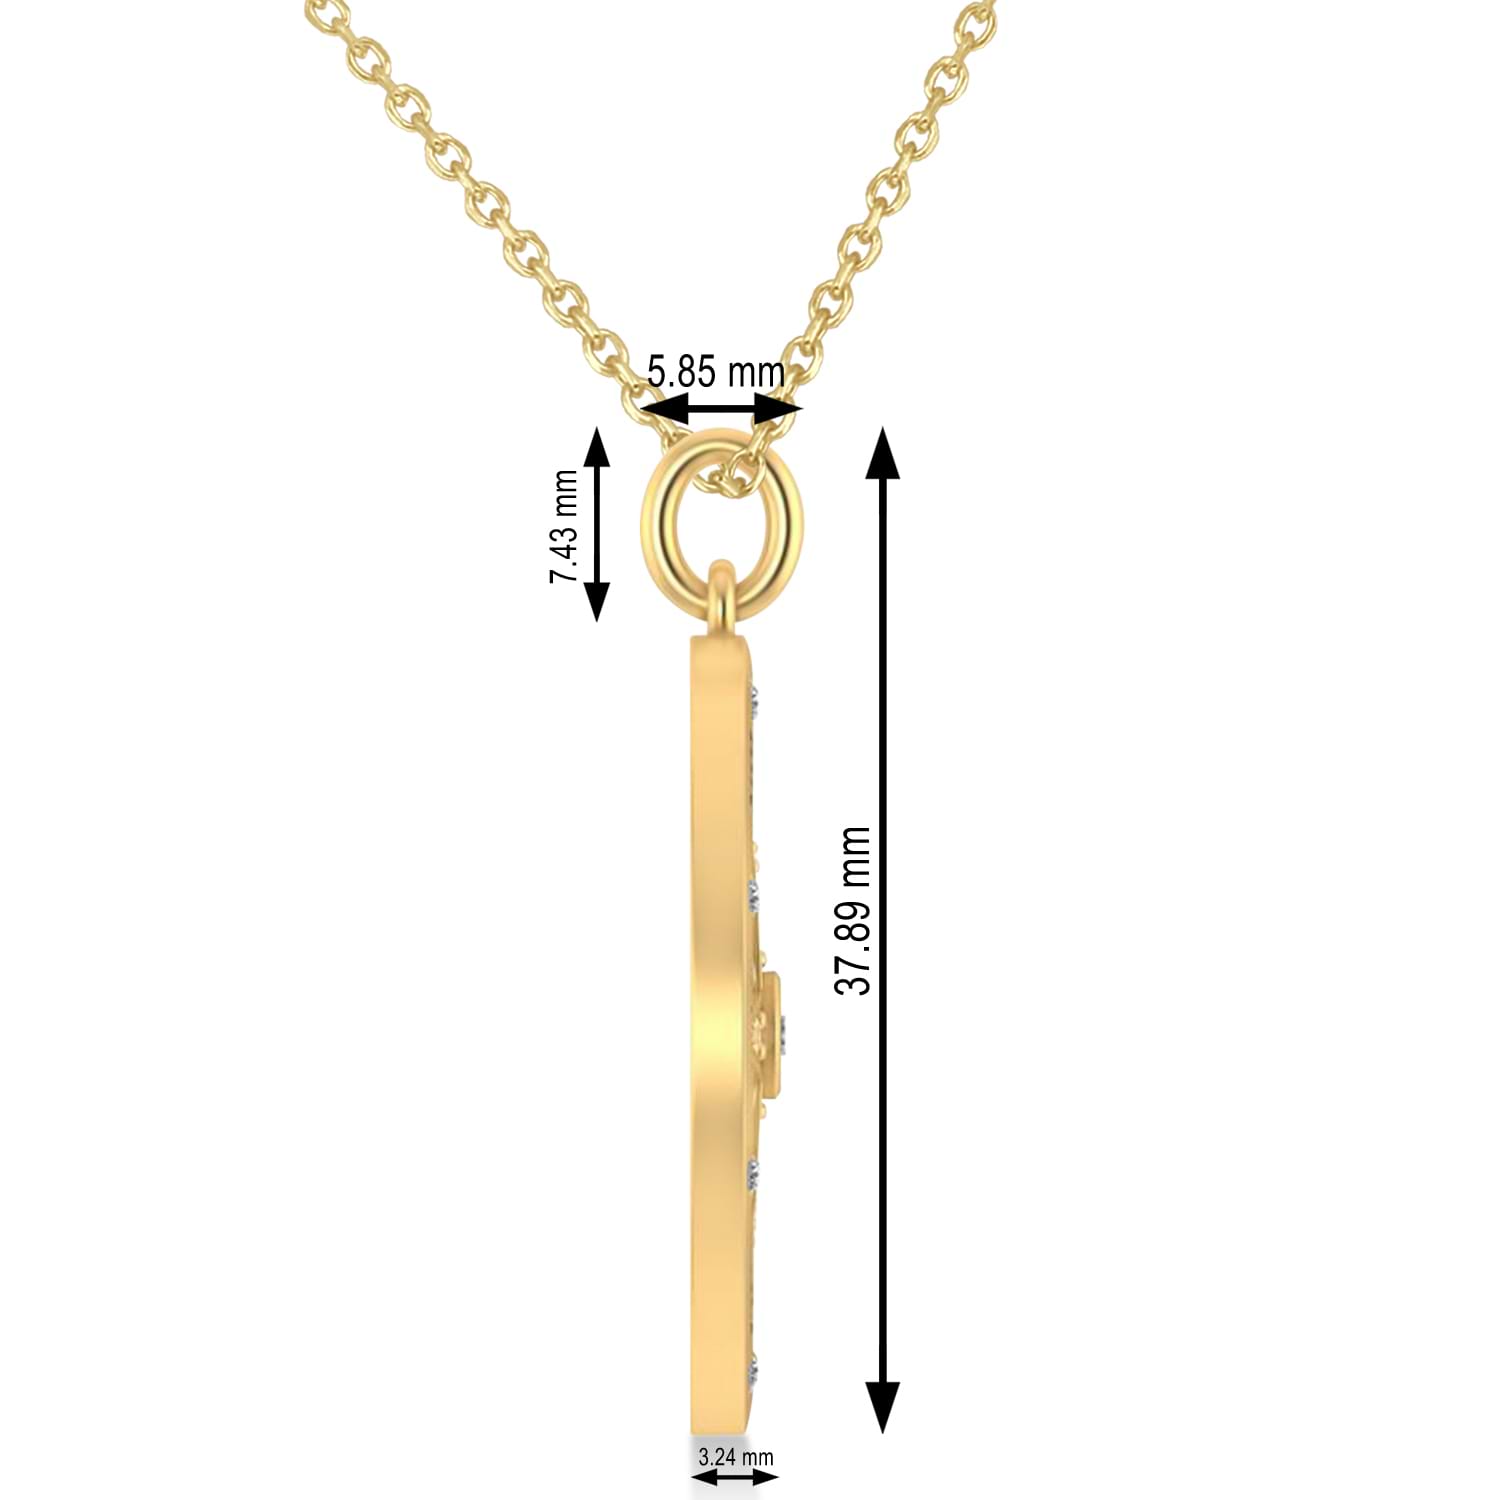 Large Compass Necklace Pendant For Men Lab Grown Diamond Accented 14k Yellow Gold (0.38ct)